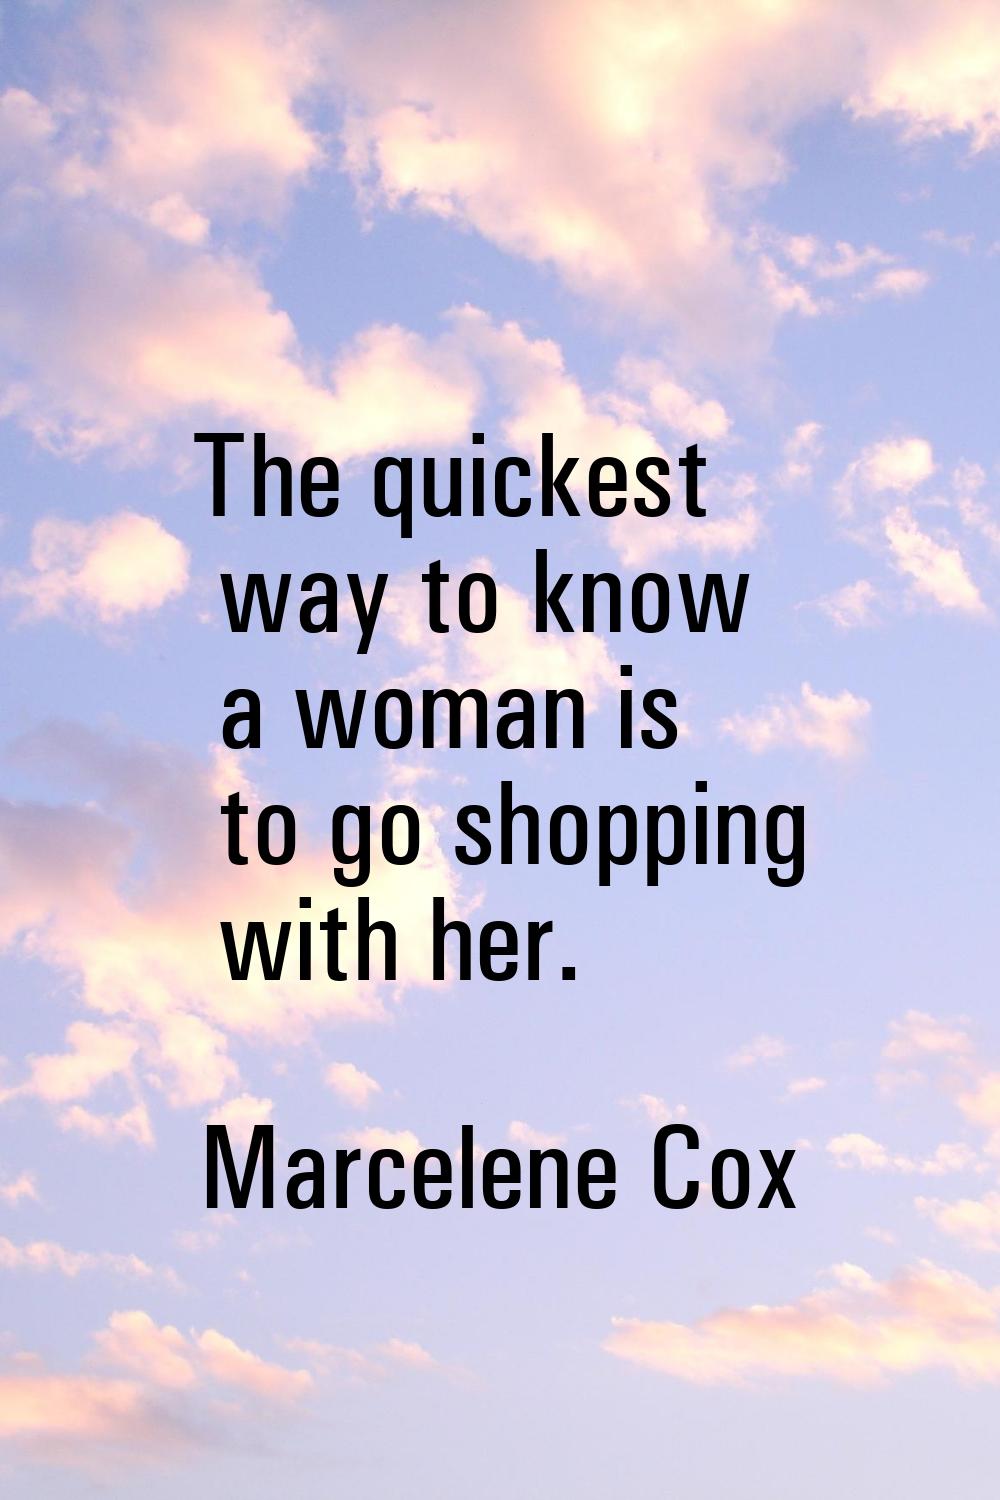 The quickest way to know a woman is to go shopping with her.